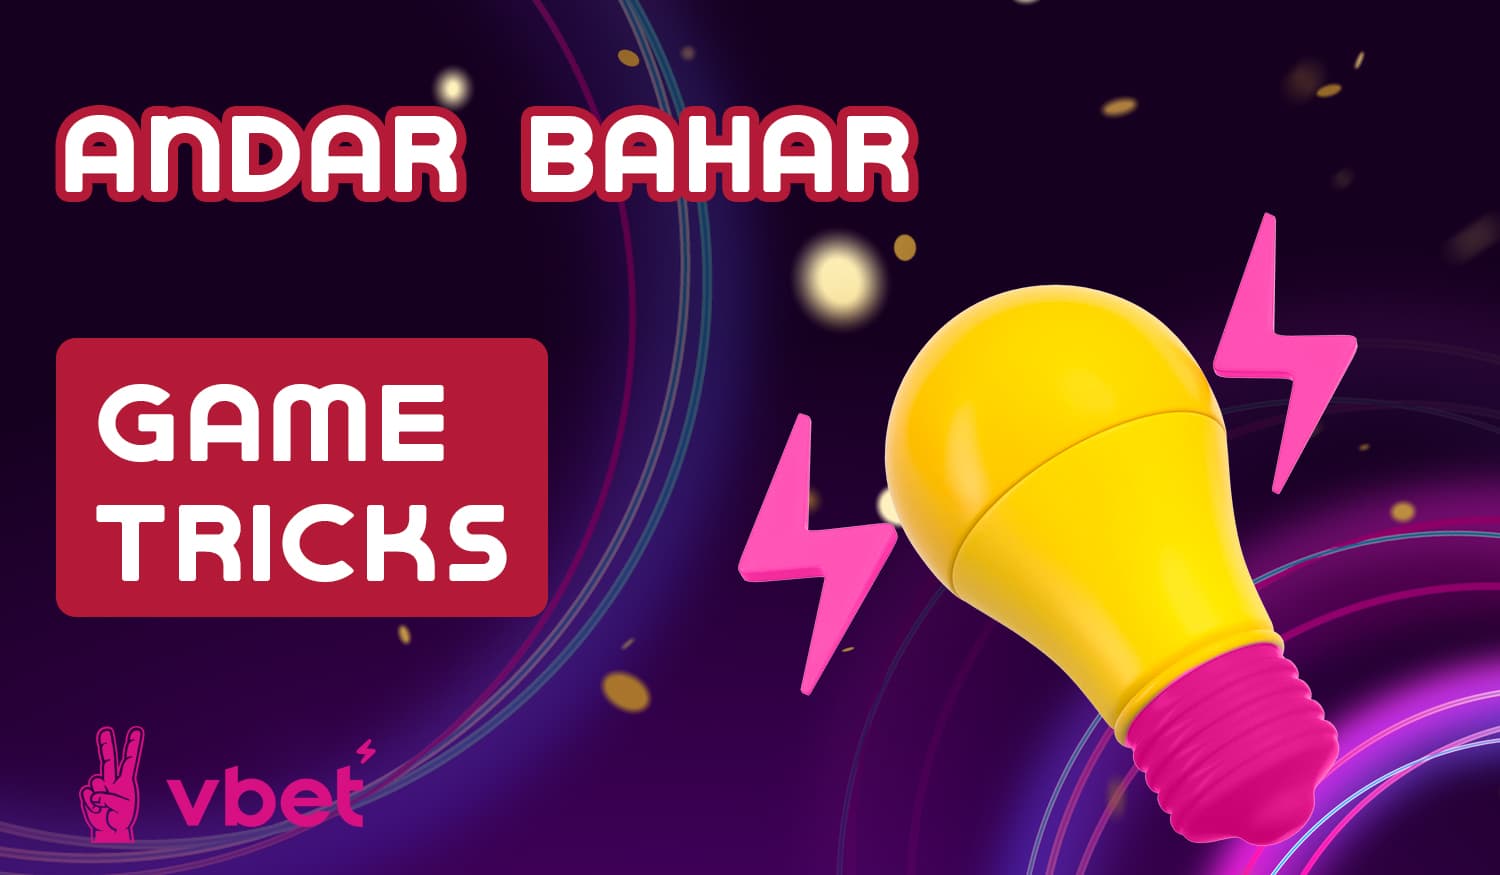 List of useful tips for playing Andar Bahar that Vbet10 users from India can use